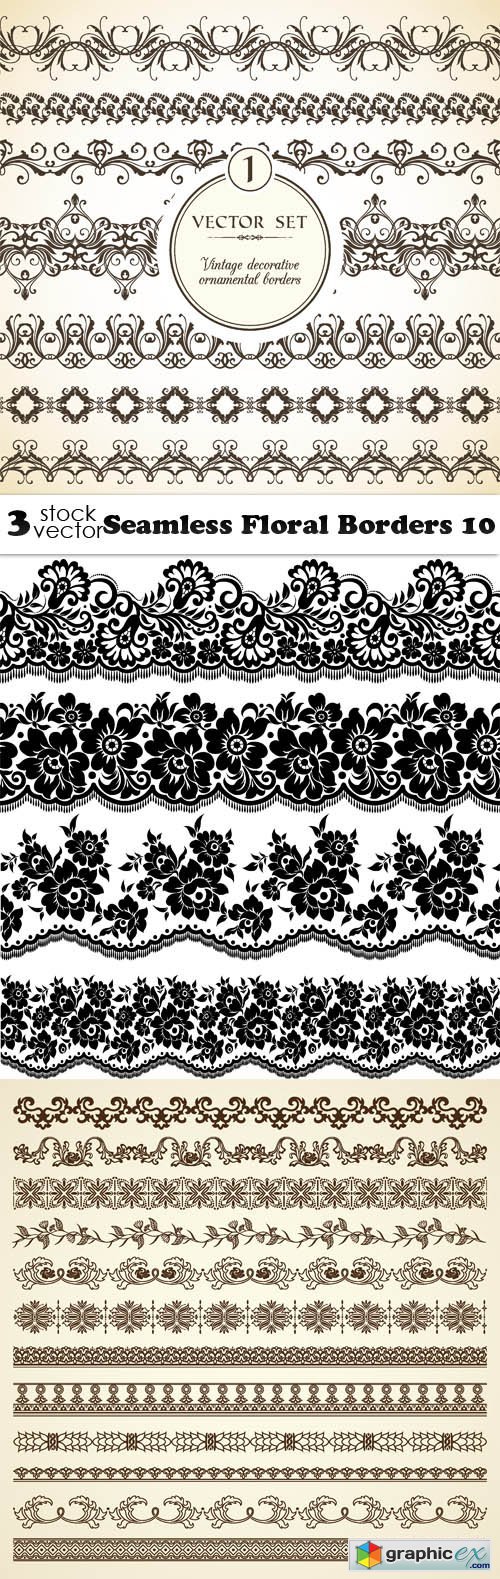 Seamless Floral Borders 10